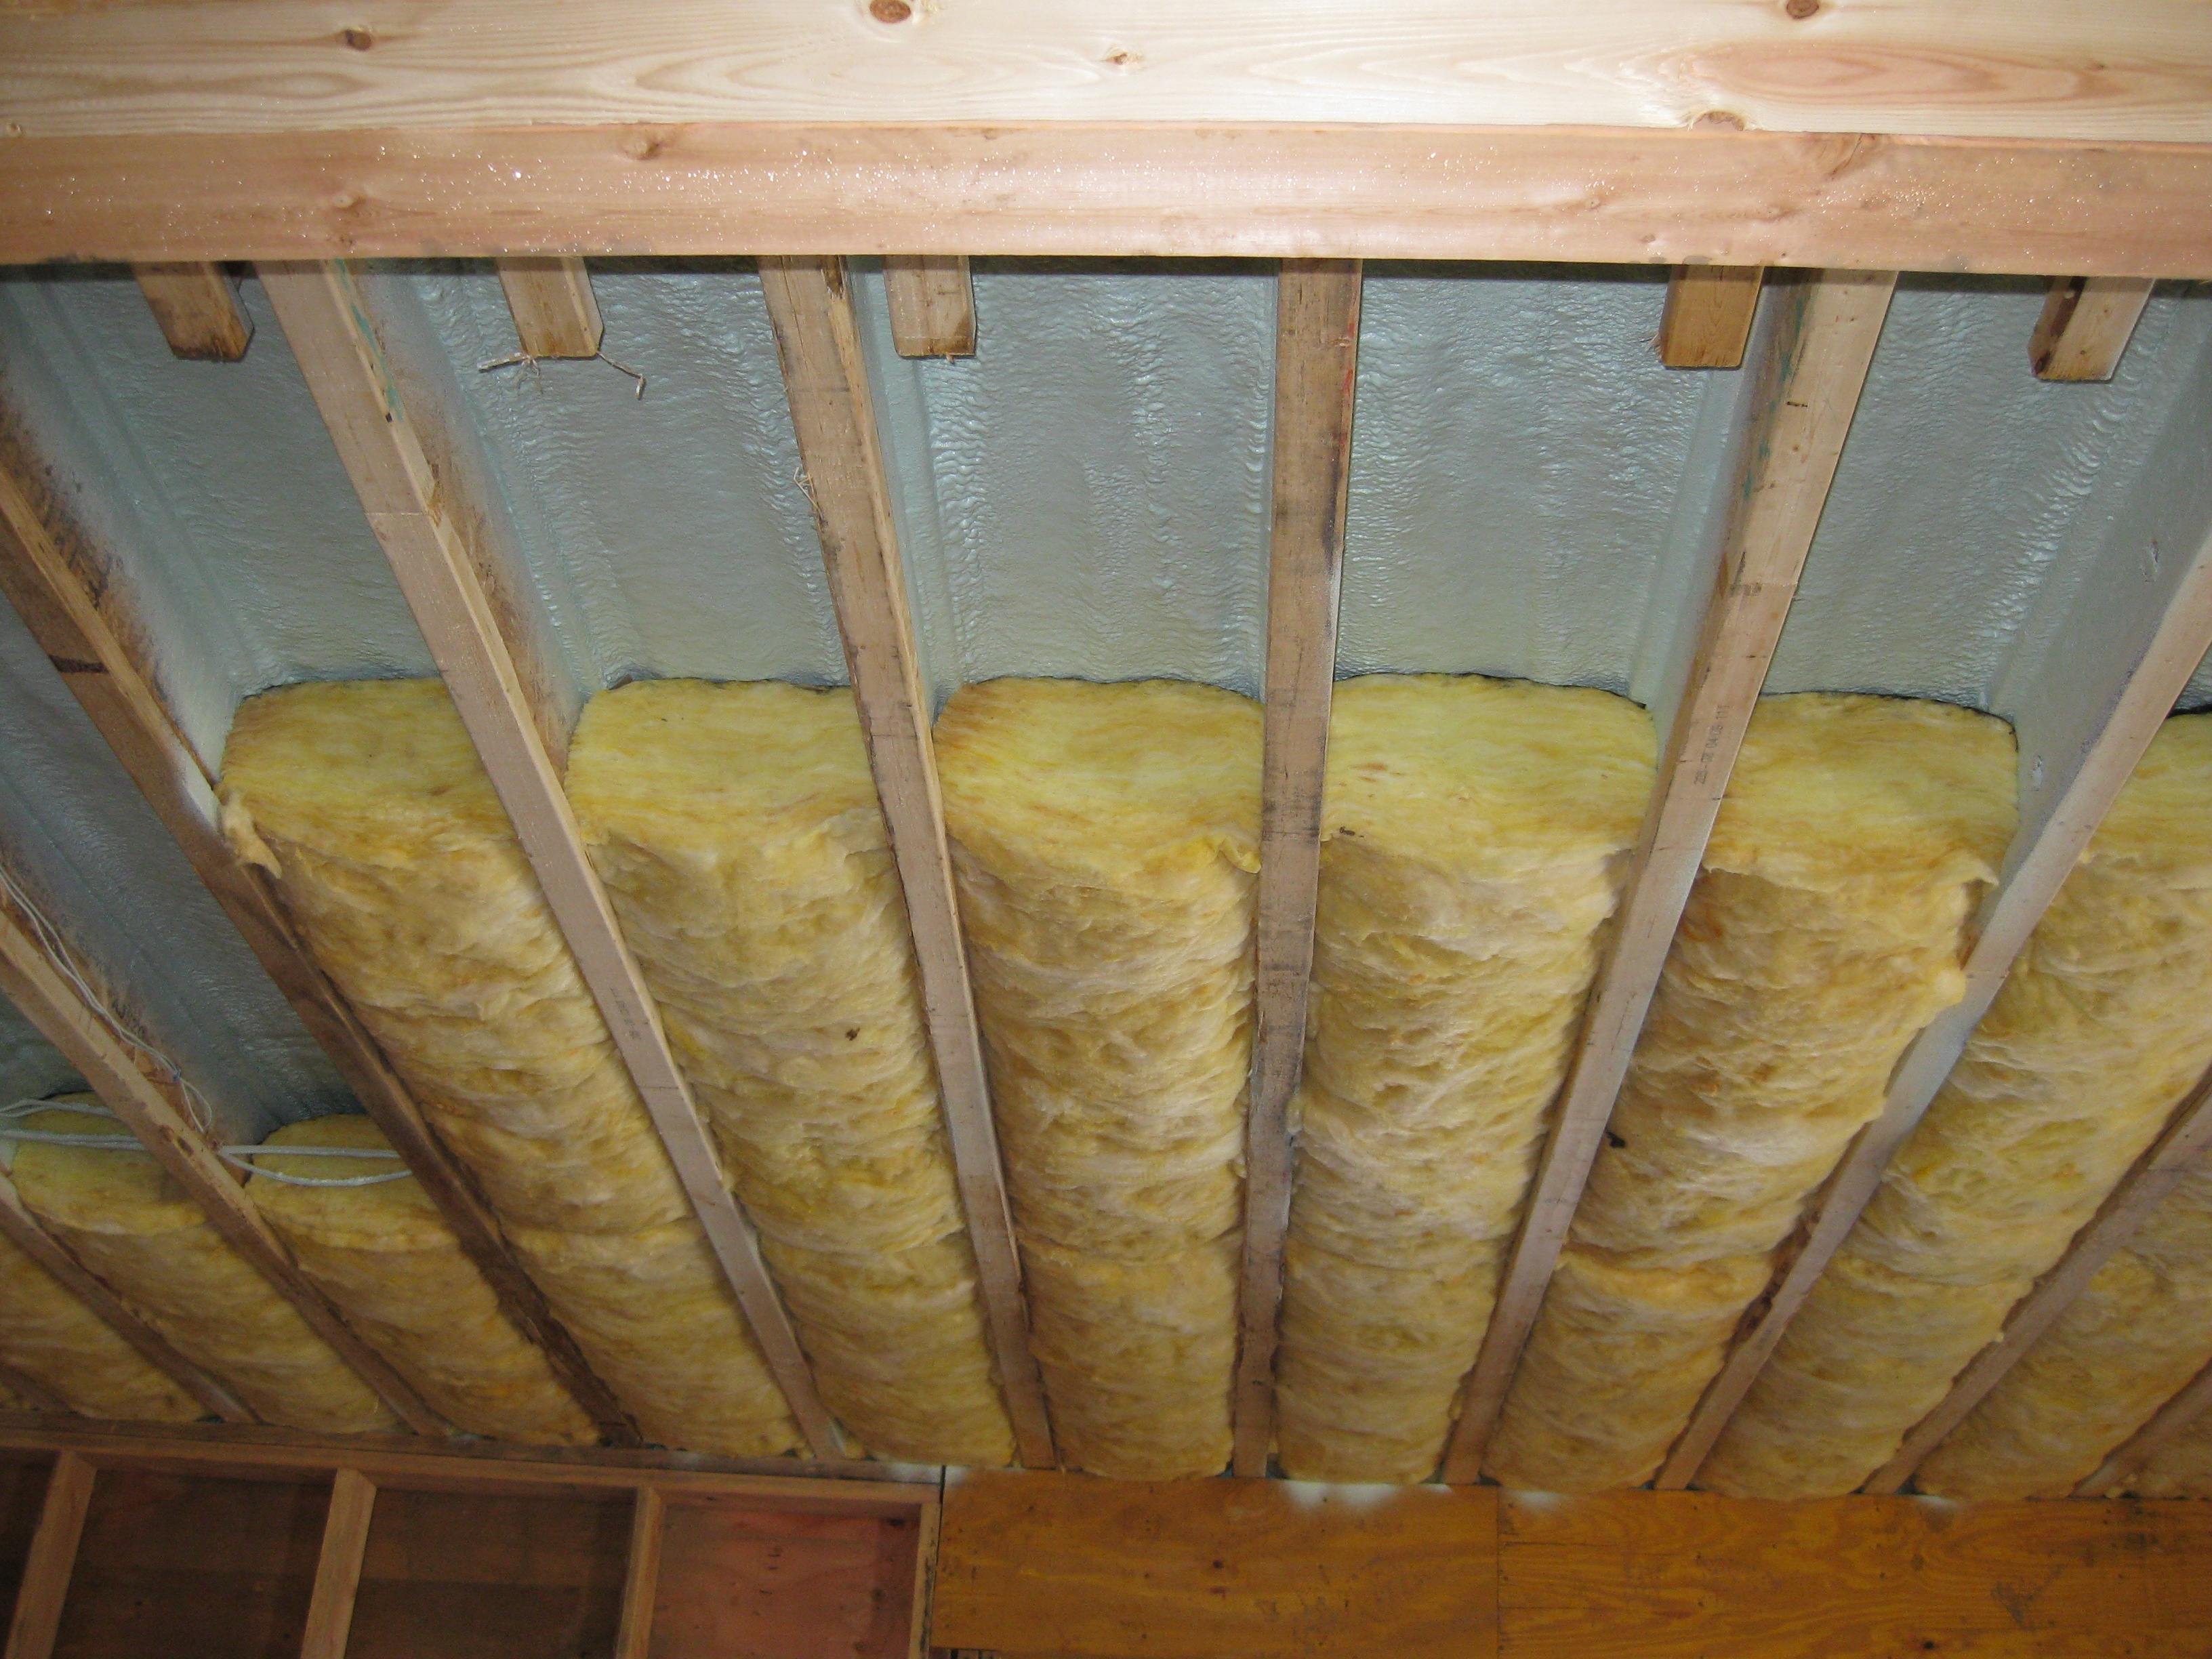 Air Sealing And Insulating Ceilings